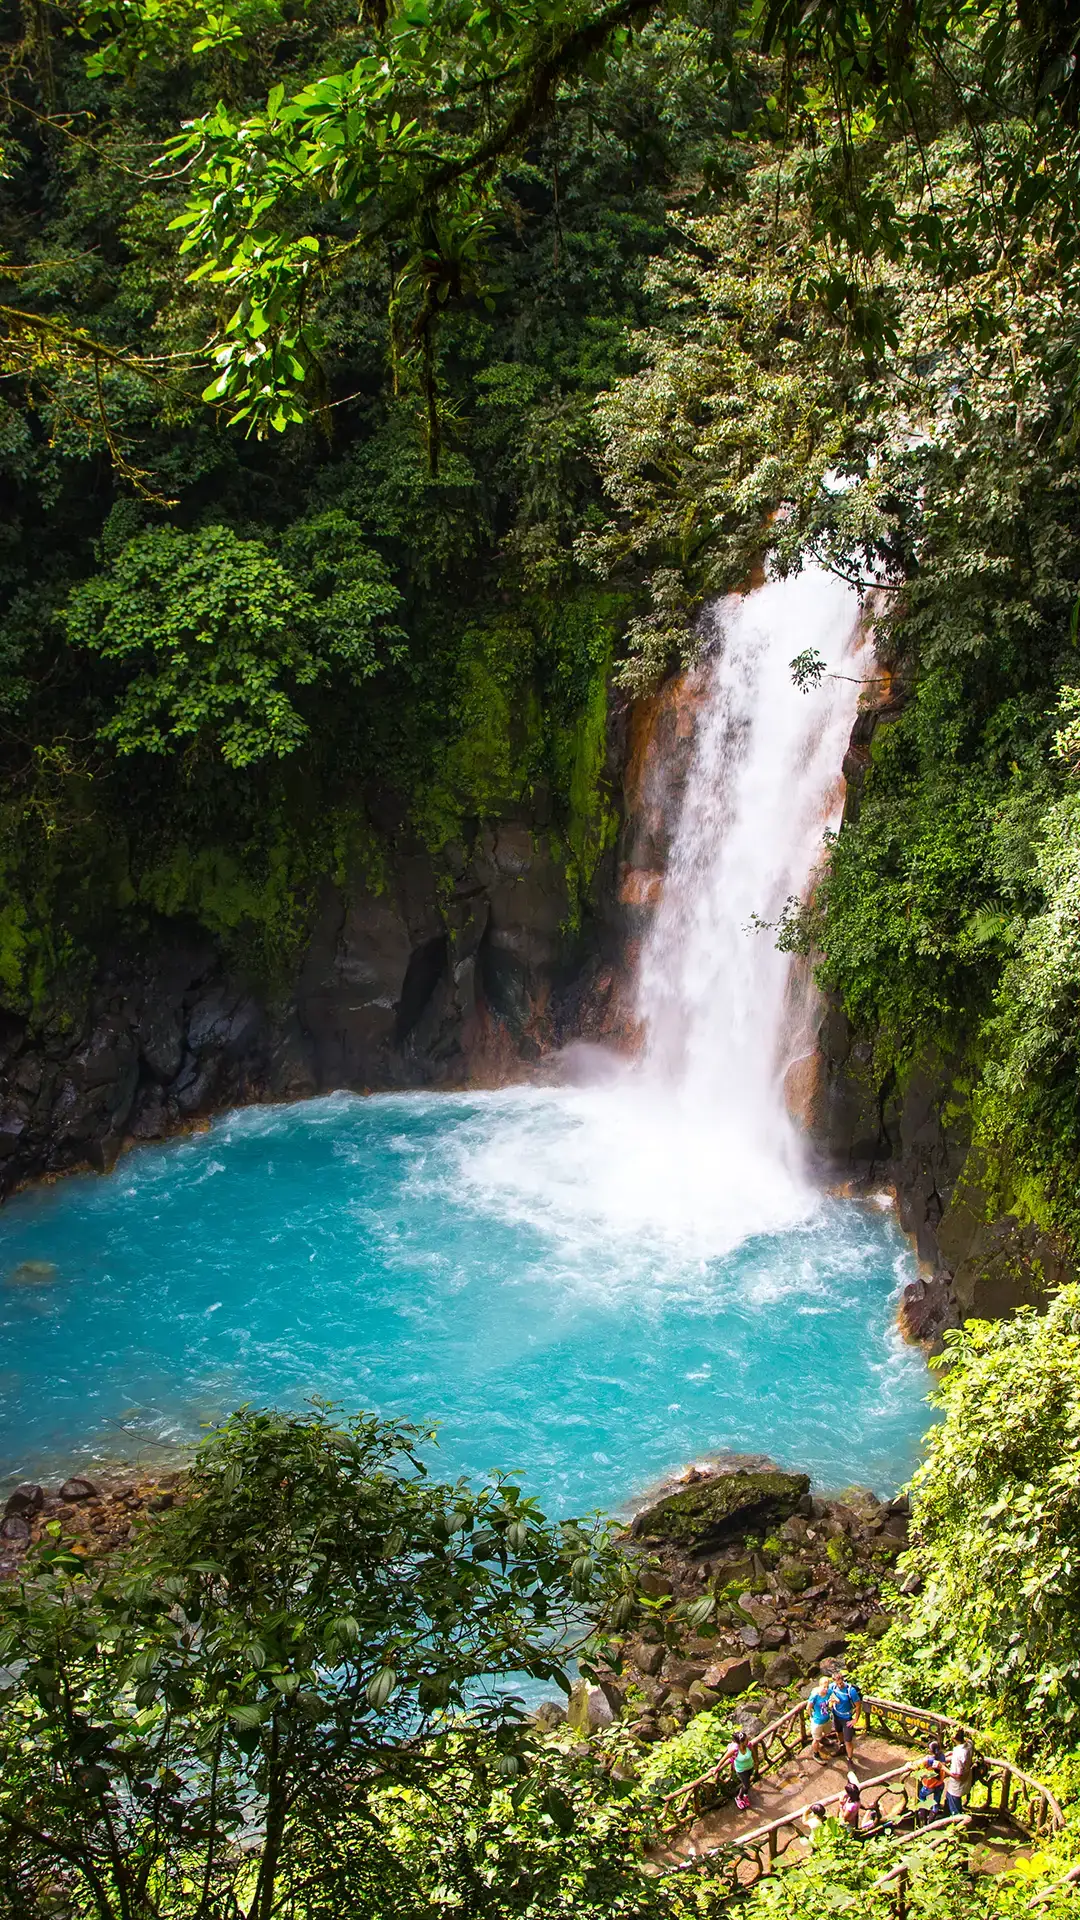 The famous waterfall of the Rio Azul, Costa Rica.